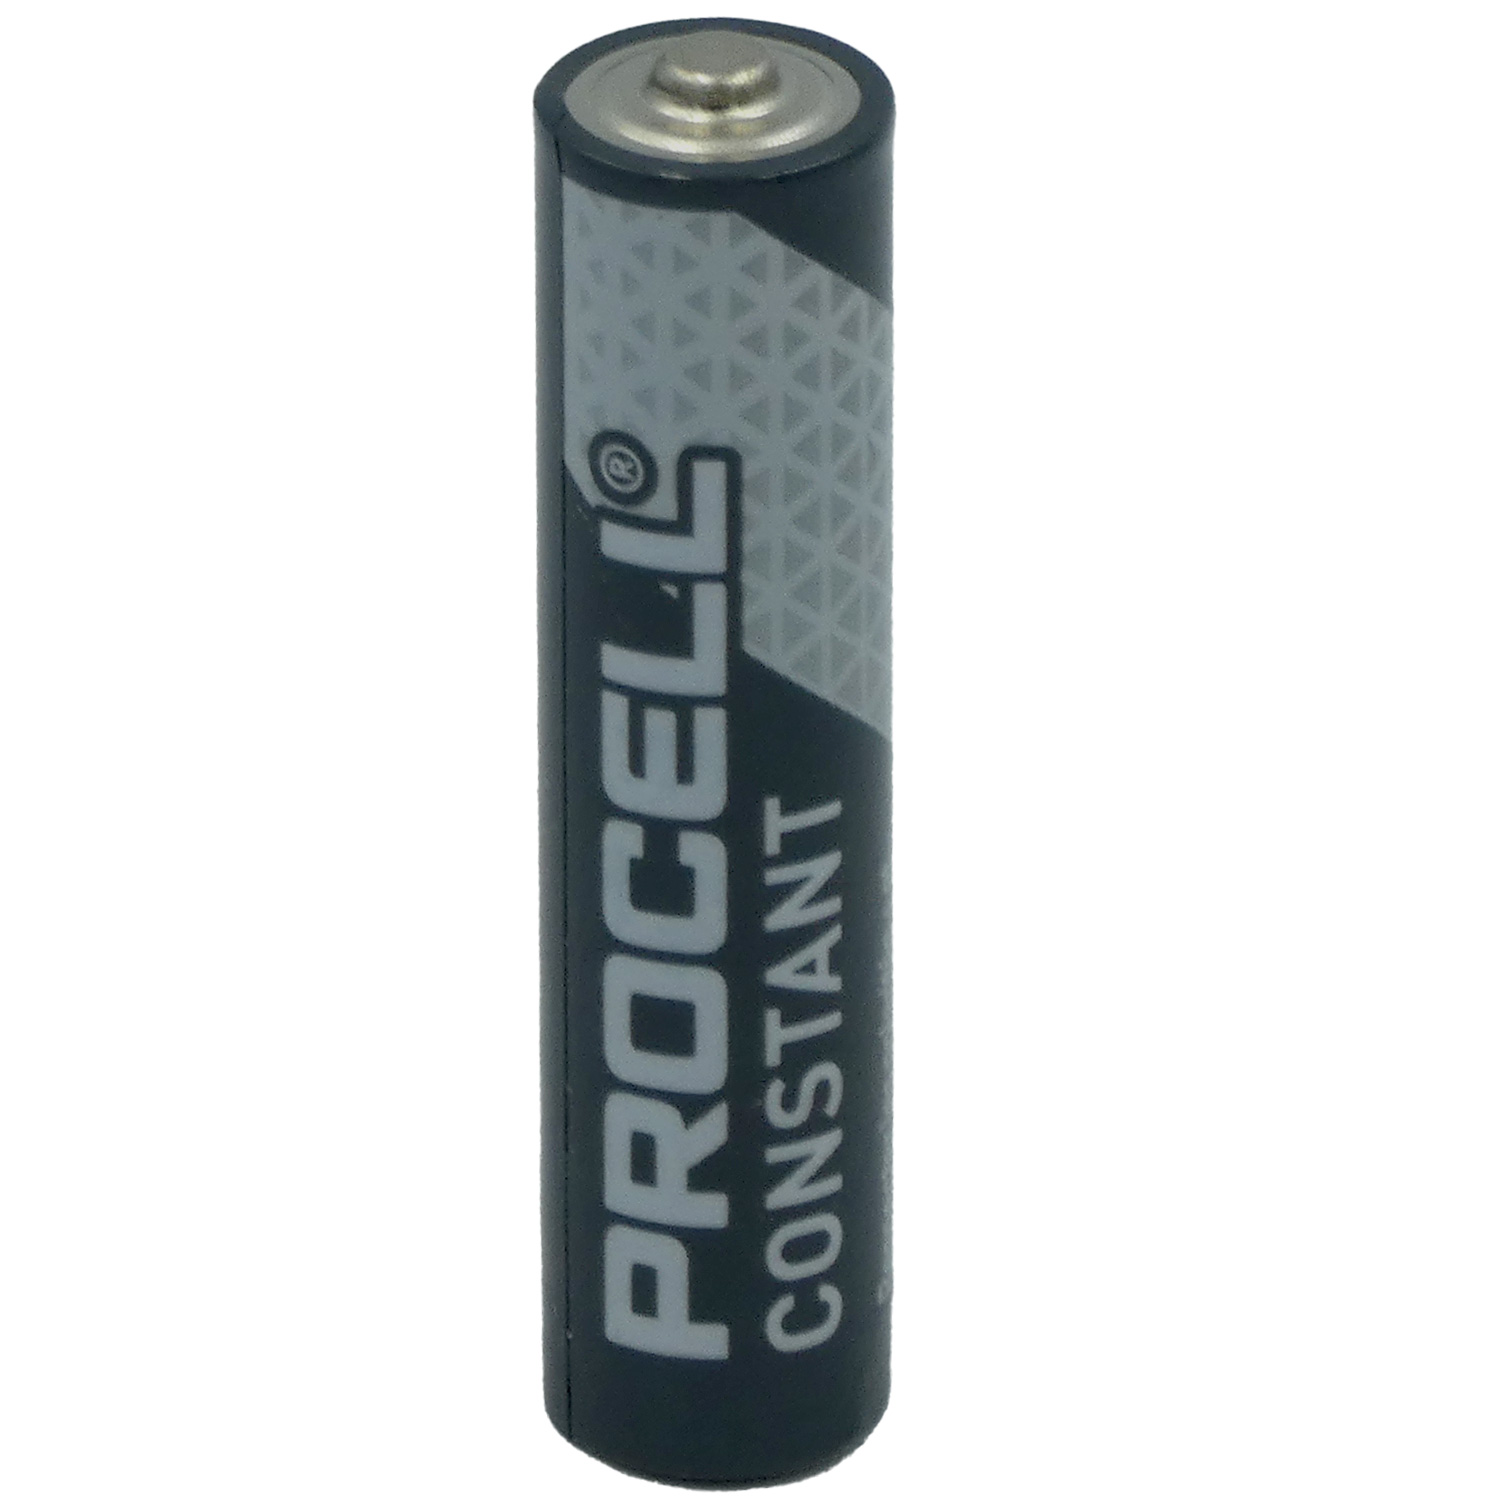 Duracell Procell MN2400 Micro Batterie AAA LR03 Batterie